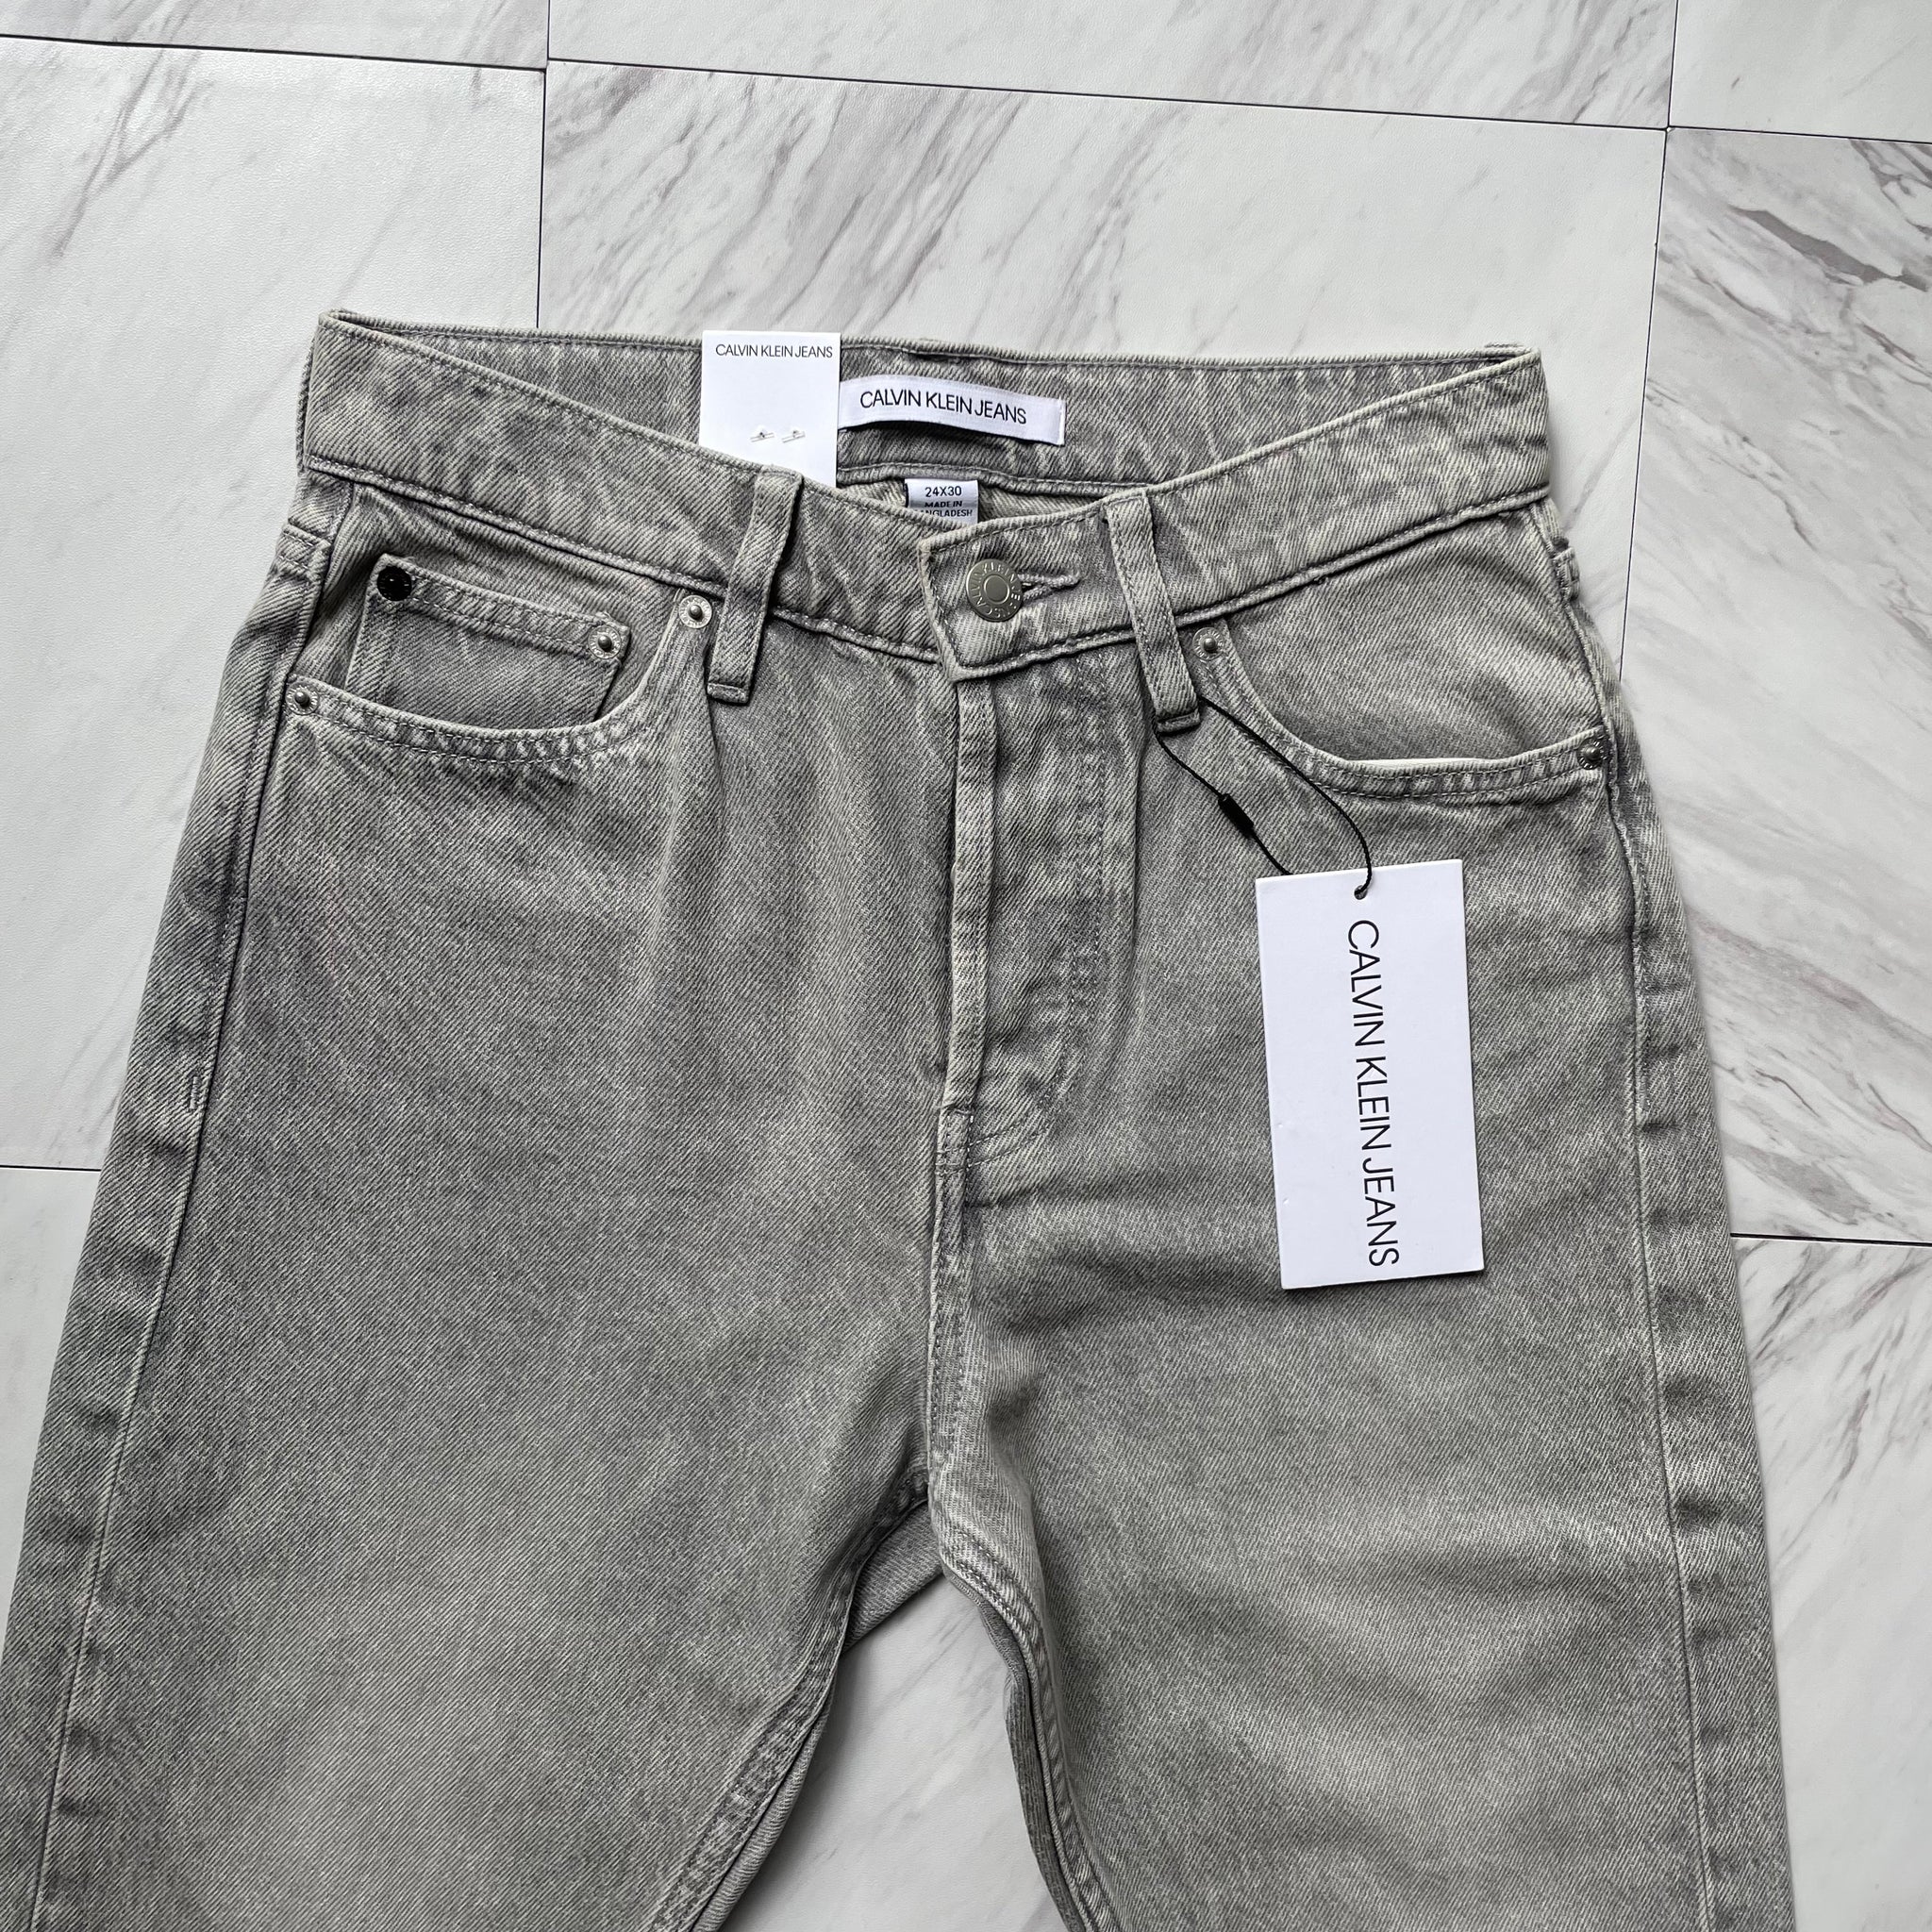 New Calvin Klein jeans, Size 24 – Holy Ogre